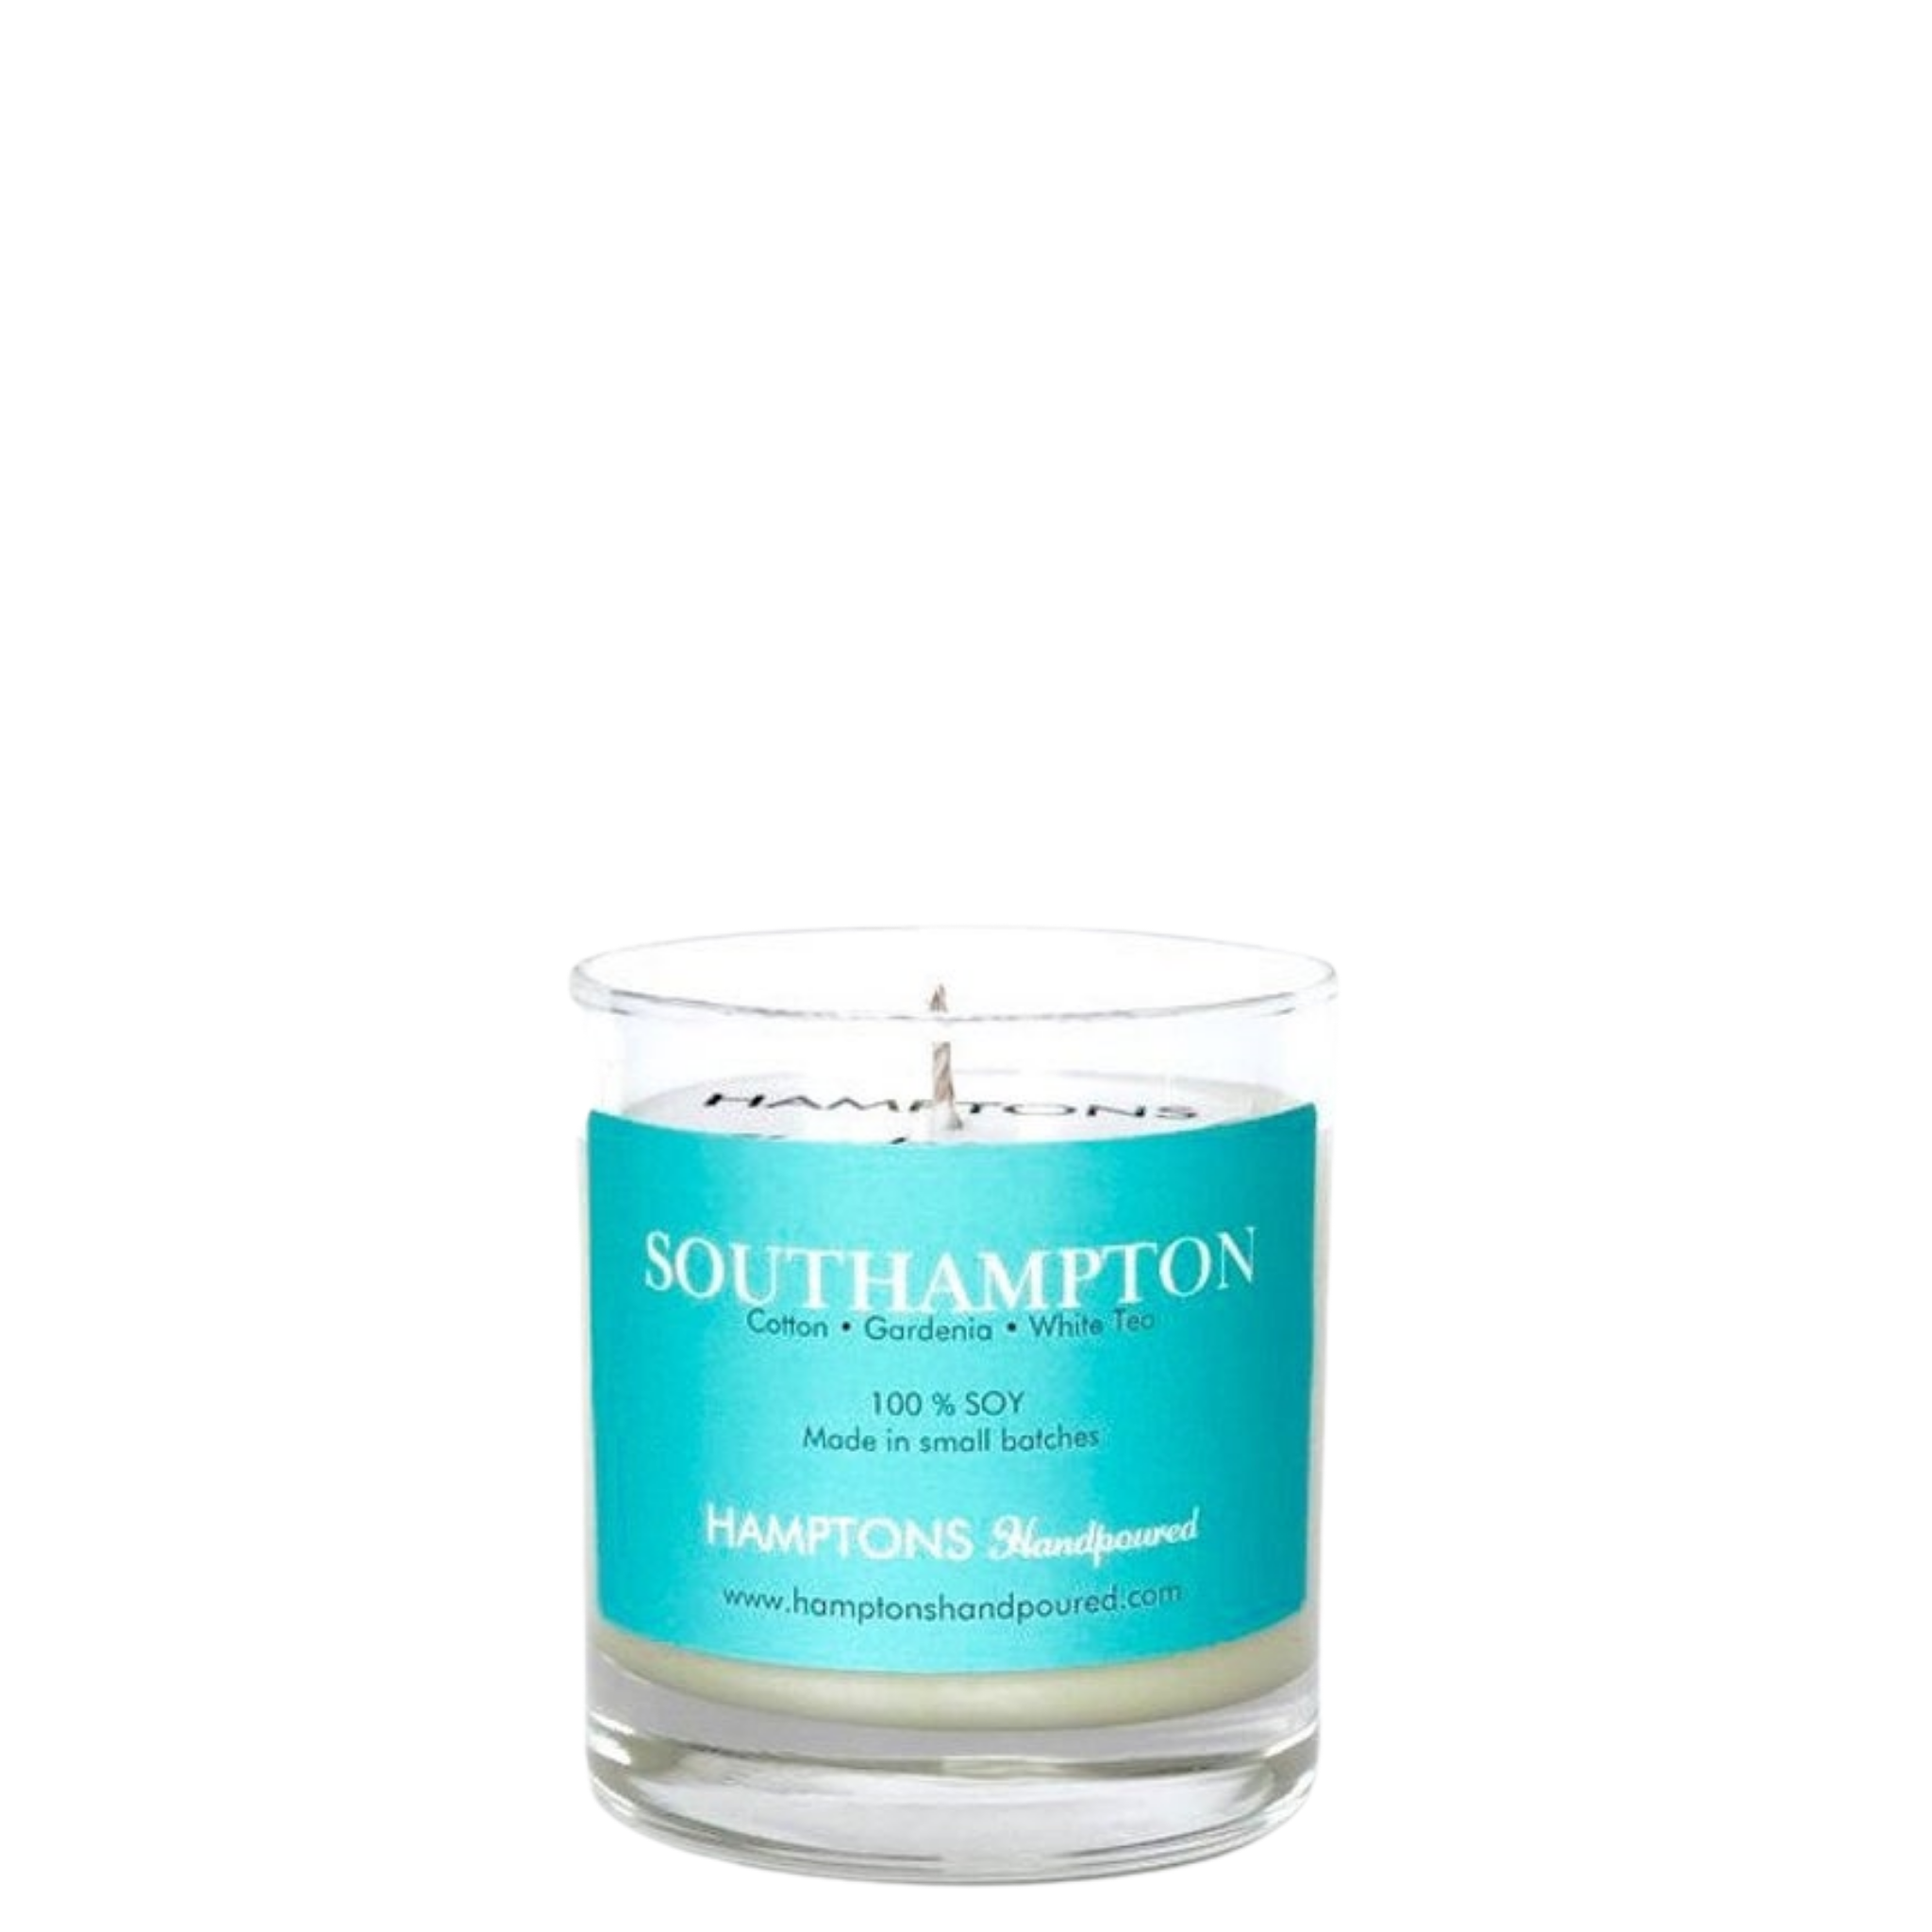 Hamptons Hand Poured Soy Candles